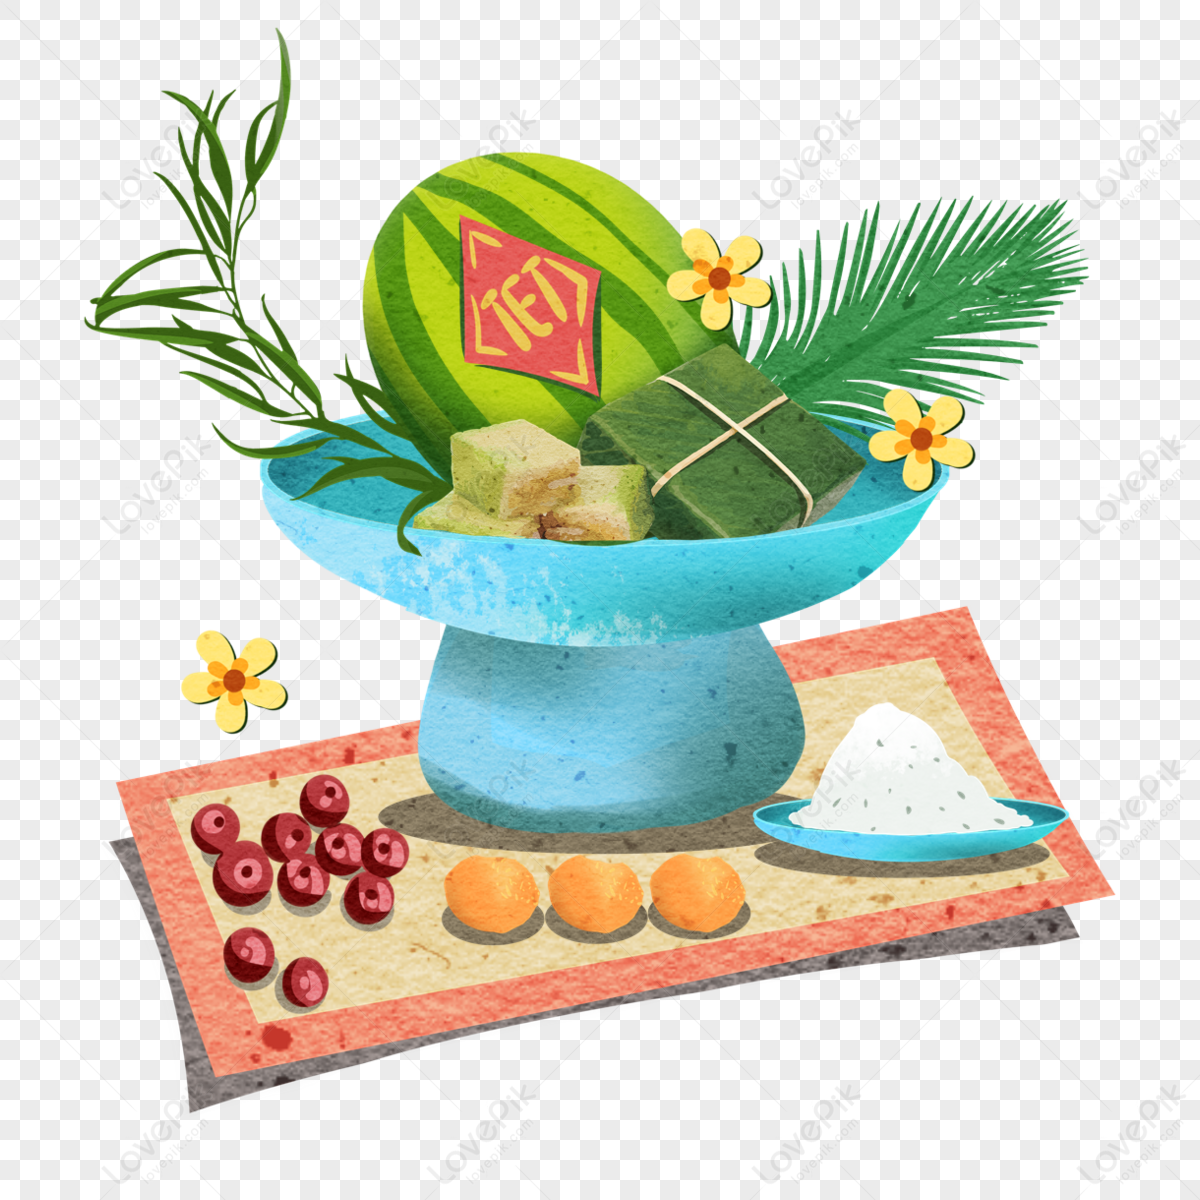 Free Fruit Plate PNG Images With Transparent Background | Free Download ...